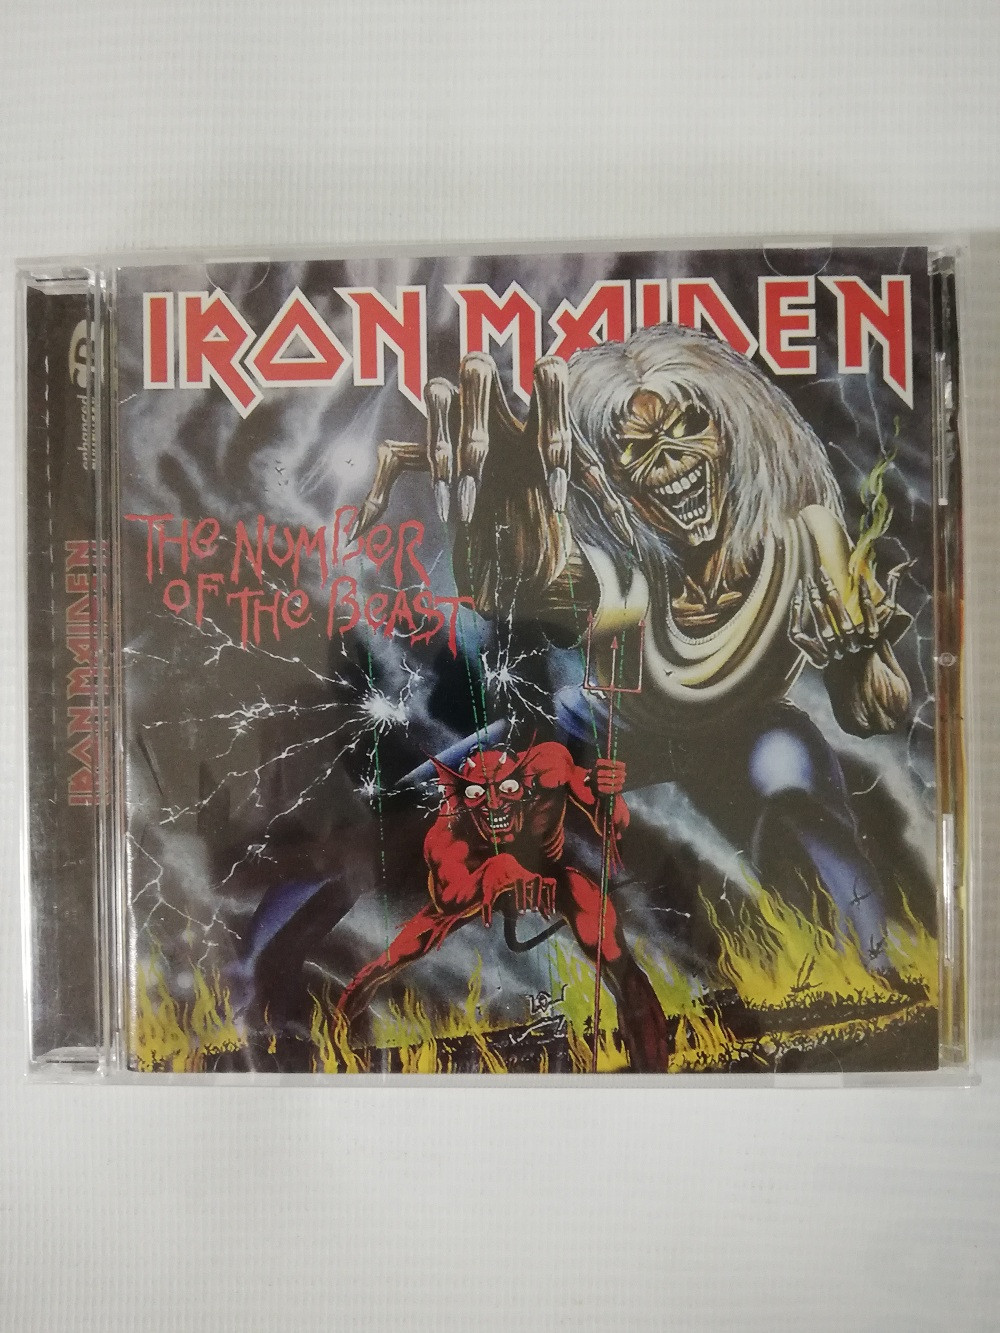 Imagen CD IRON MAIDEN - THE NUMBER OF THE BEAST  1